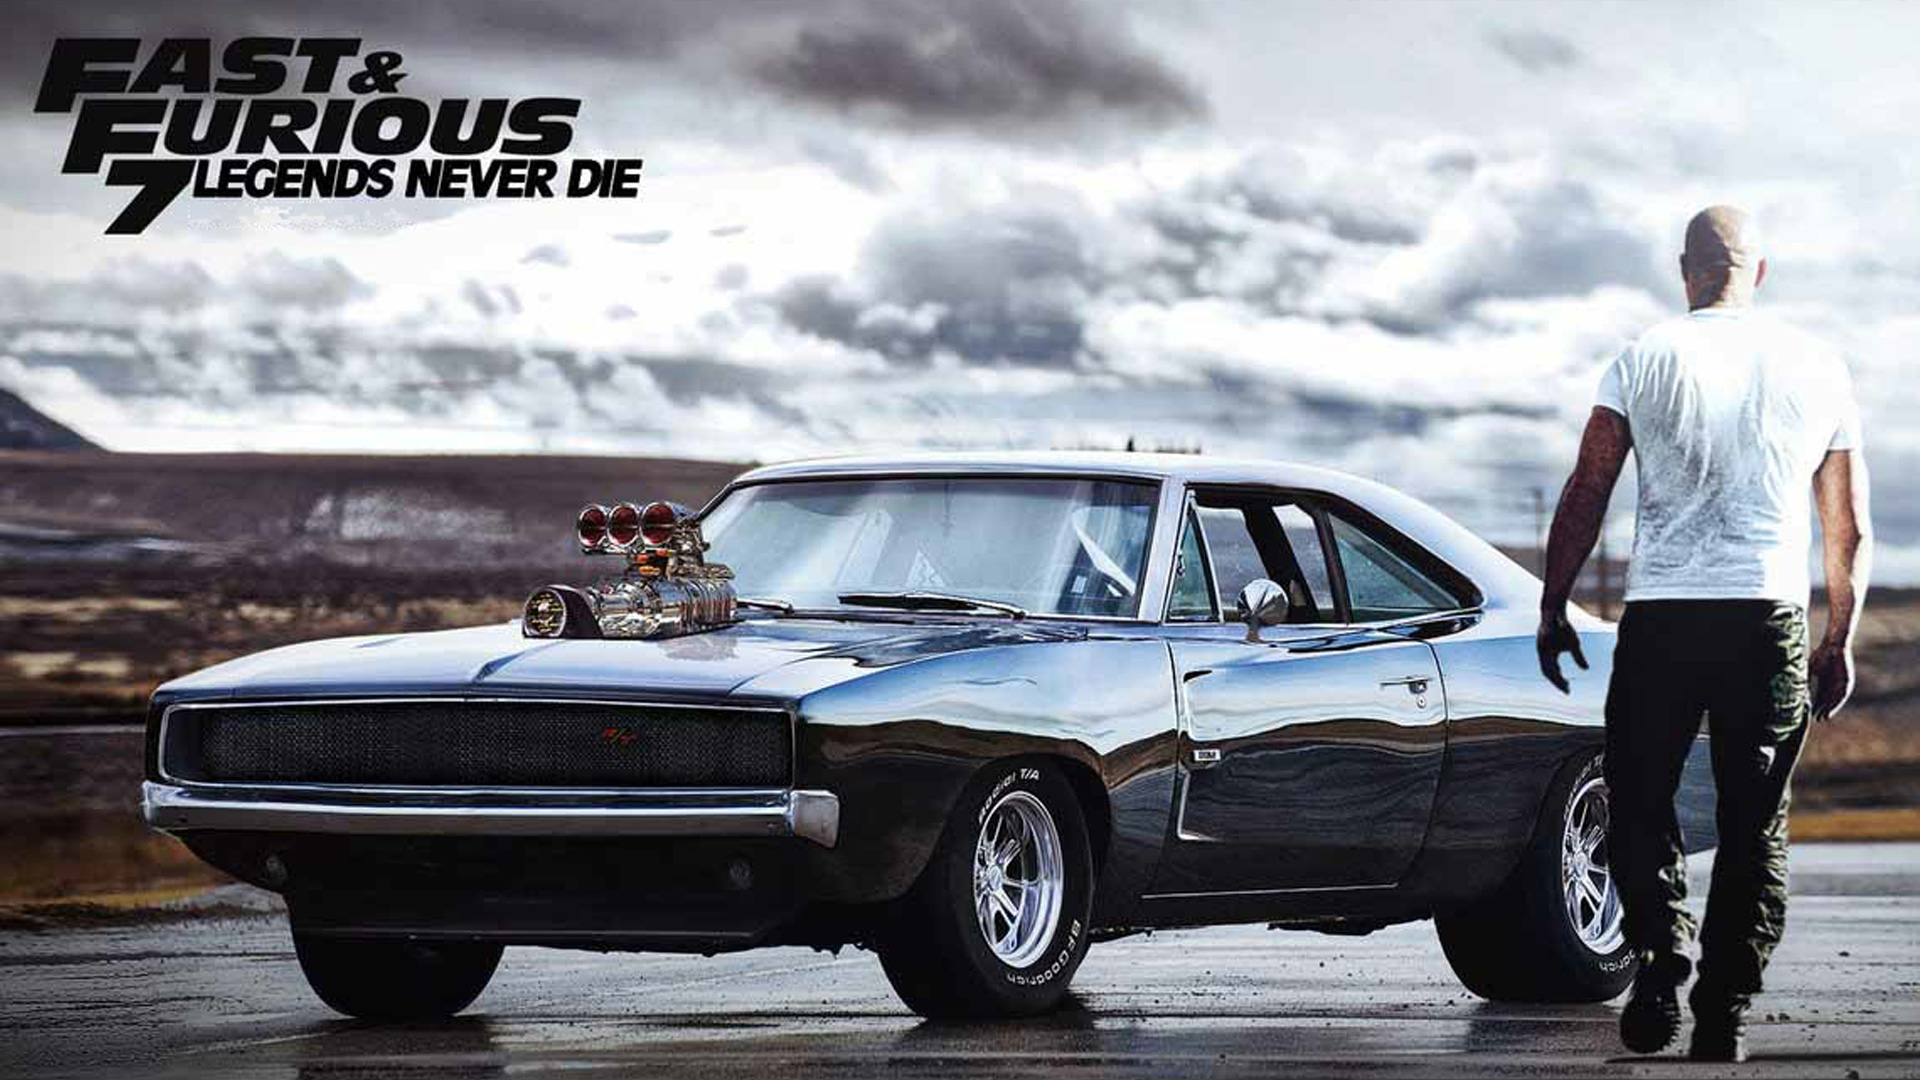 Fast Furious 7 Legends Never Die Wallpaper Wallpaper Fast And Furious 7 Cars